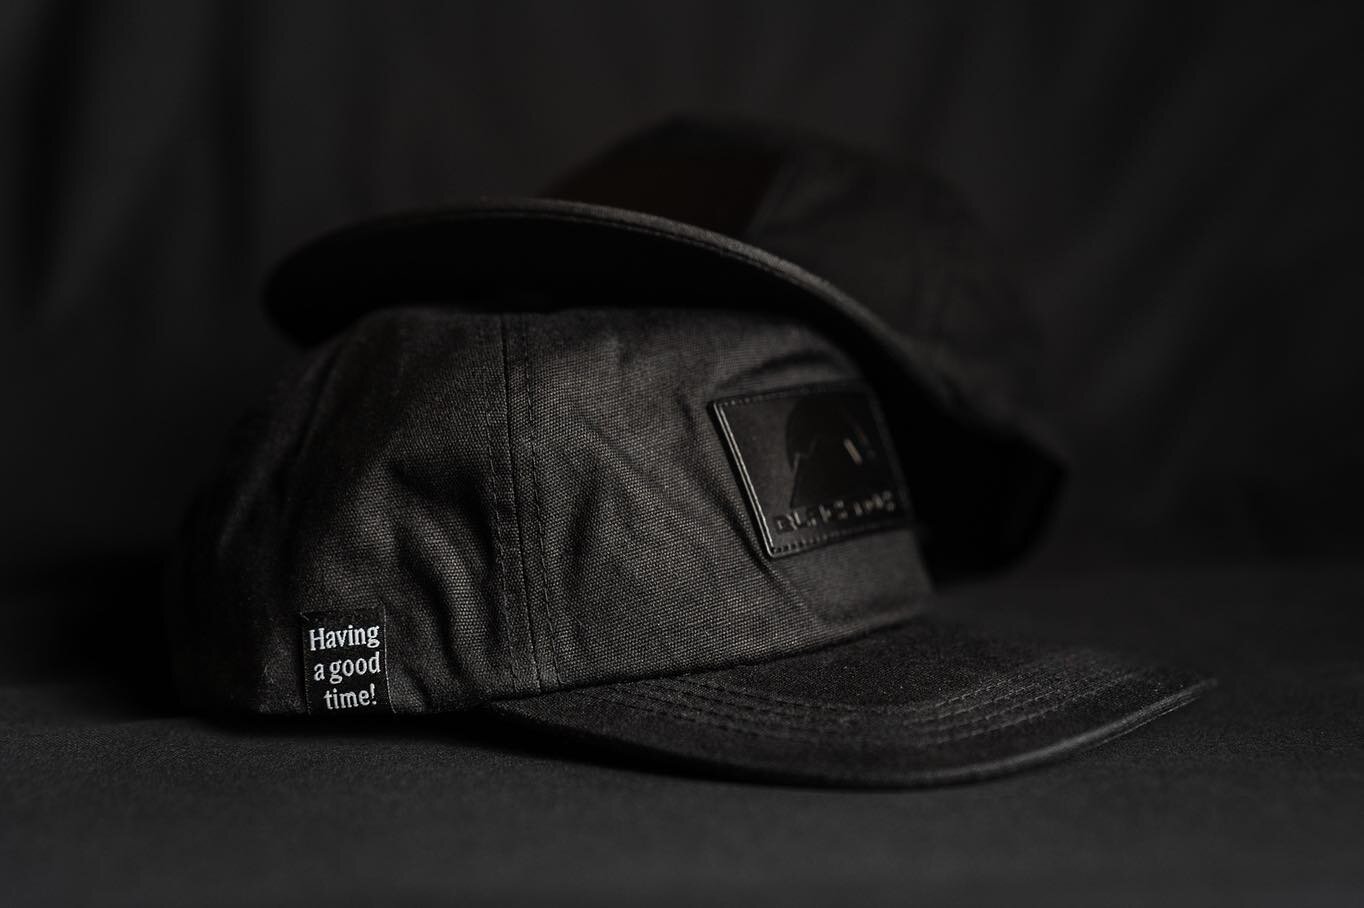 Introducing the Midnight Good Time Hat. 

Unstructured, waxed cotton hat with a blacked out leather patch and side pinch tag for holding your &ldquo;accessories.&rdquo;

Find em at the pub and our website.